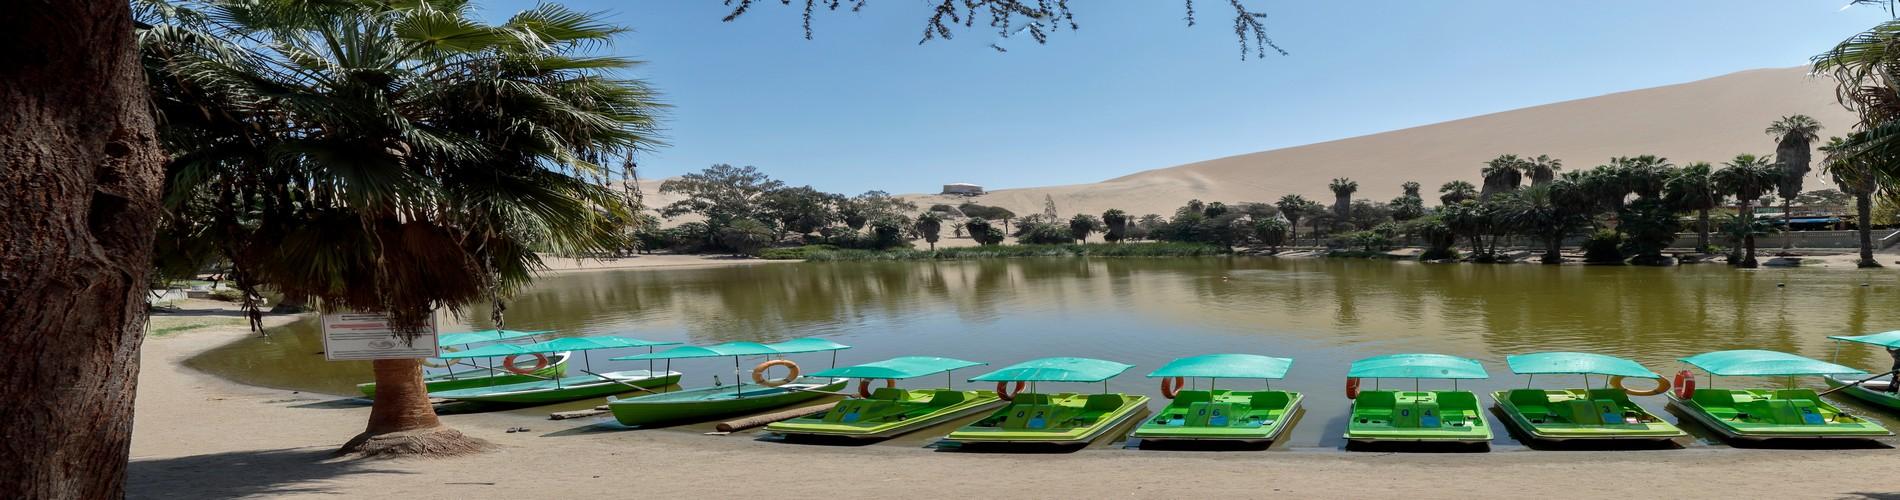 TRAVEL PHOTOGRAPHY IN HUACACHINA -The Oasis in the Peruvian Desert